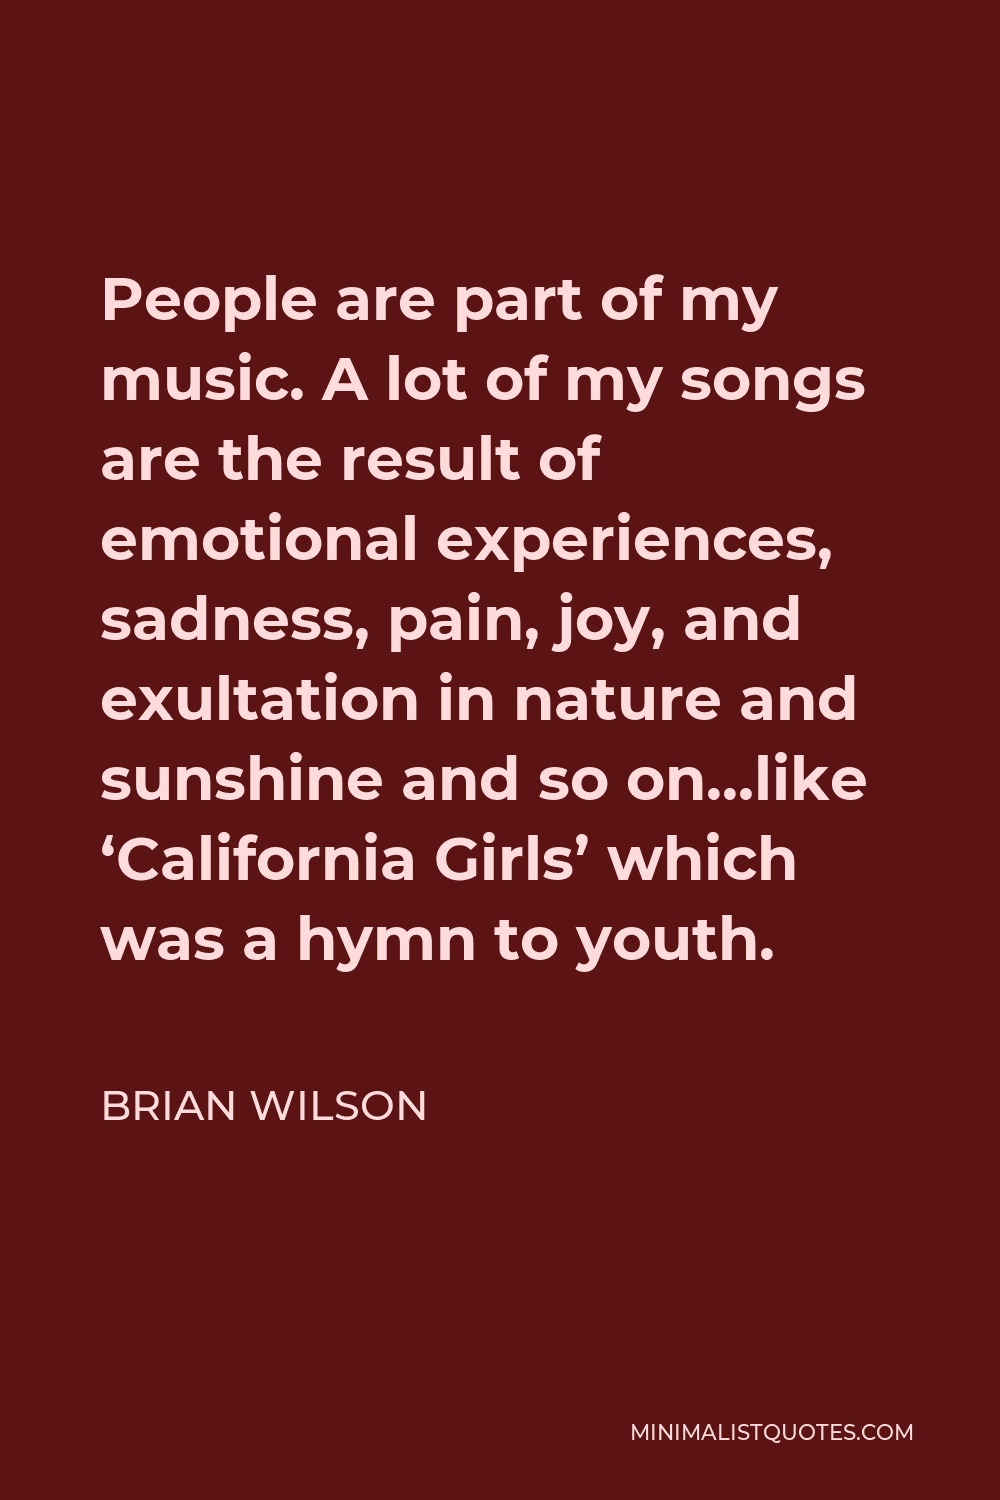 Brian Wilson Quote - People are part of my music. A lot of my songs are the result of emotional experiences, sadness, pain, joy, and exultation in nature and sunshine and so on…like ‘California Girls’ which was a hymn to youth.